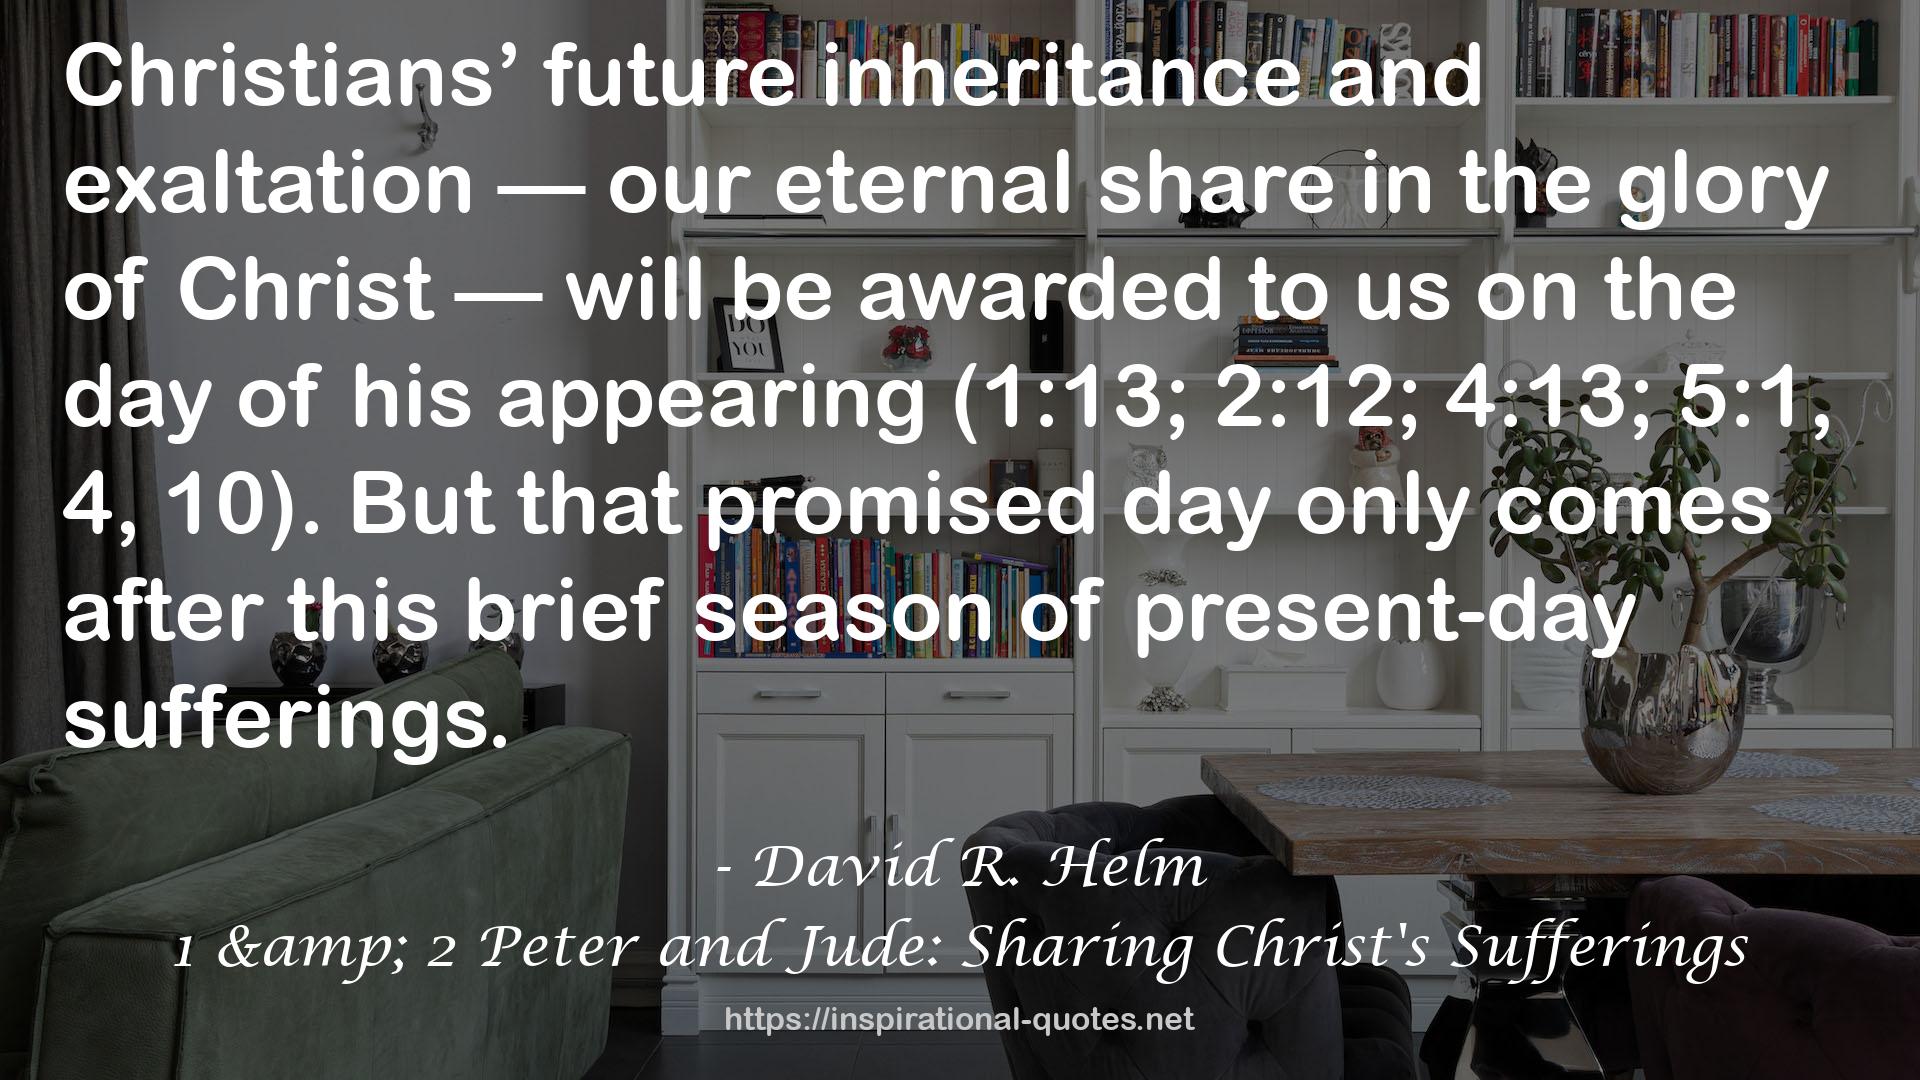 1 & 2 Peter and Jude: Sharing Christ's Sufferings QUOTES